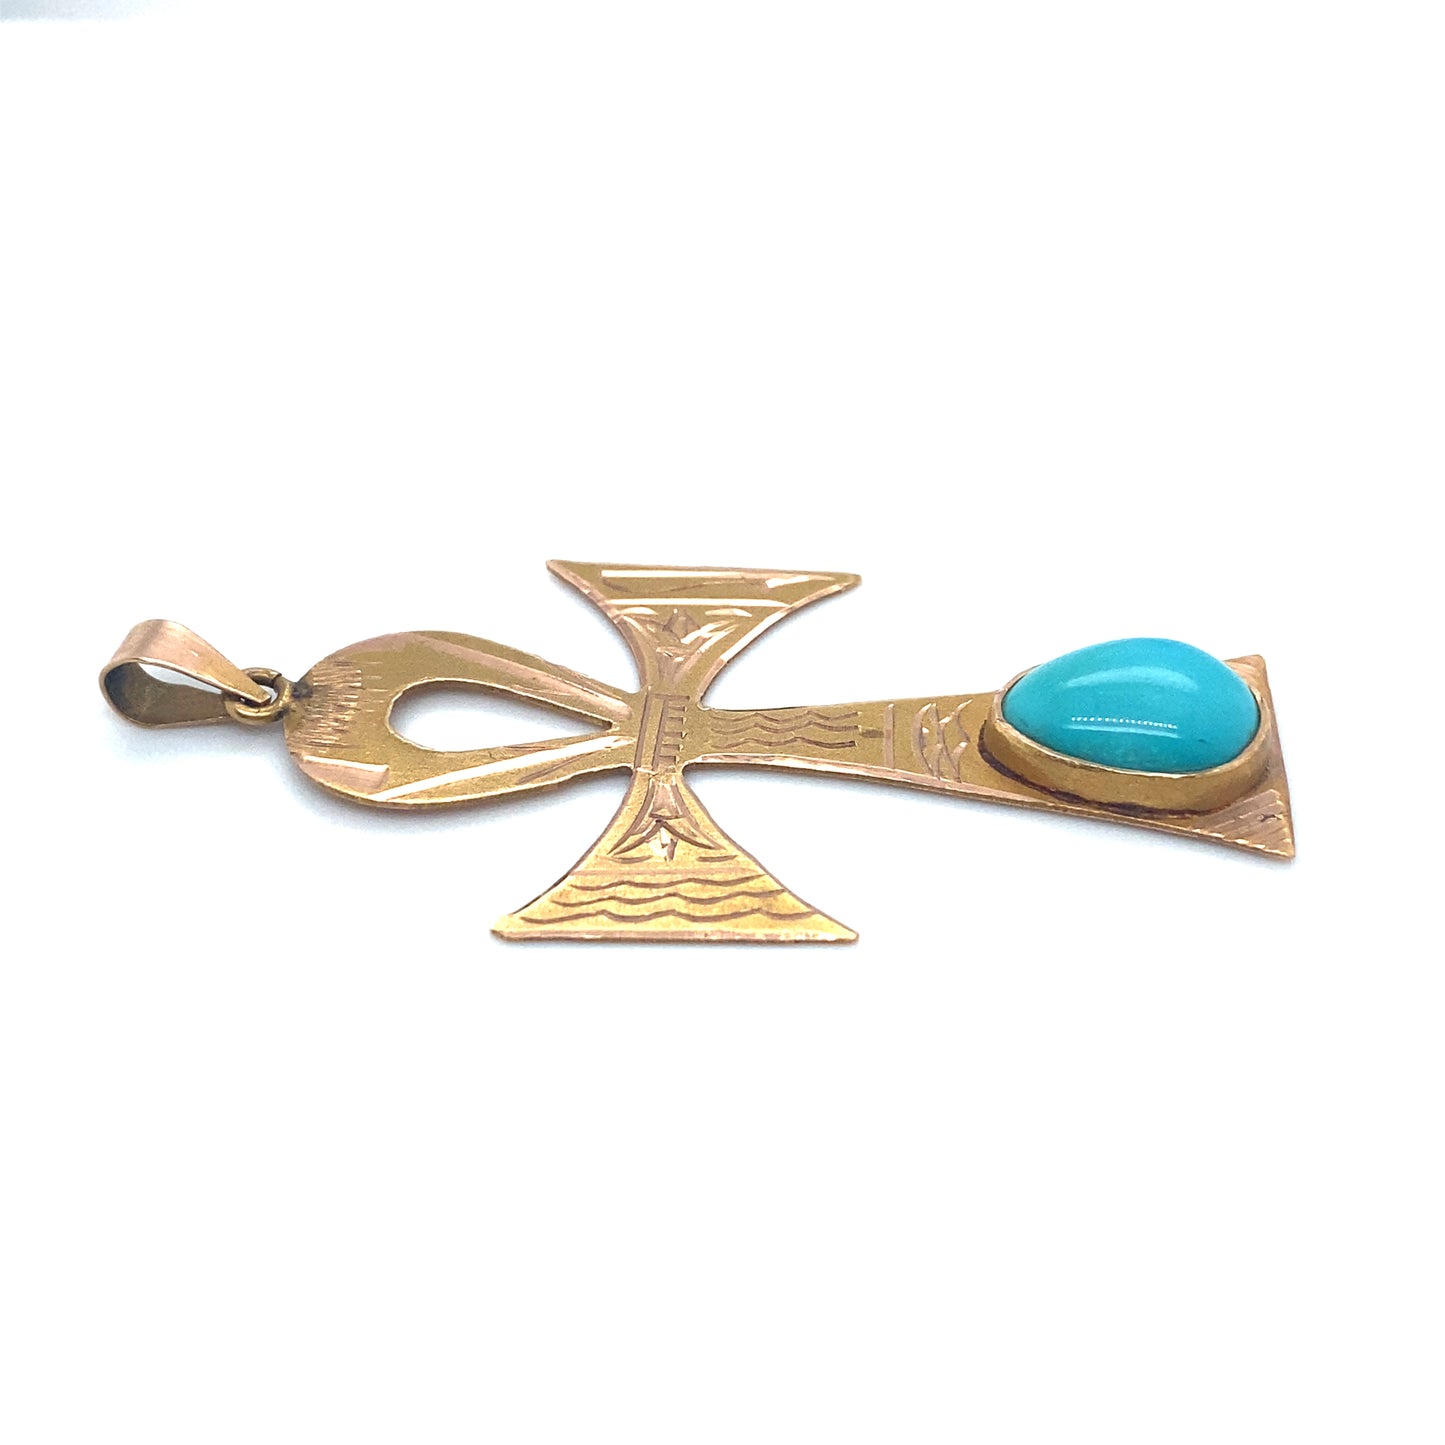 Circa 1970s Egyptian Ankh Turquoise Pendant in 18K Gold